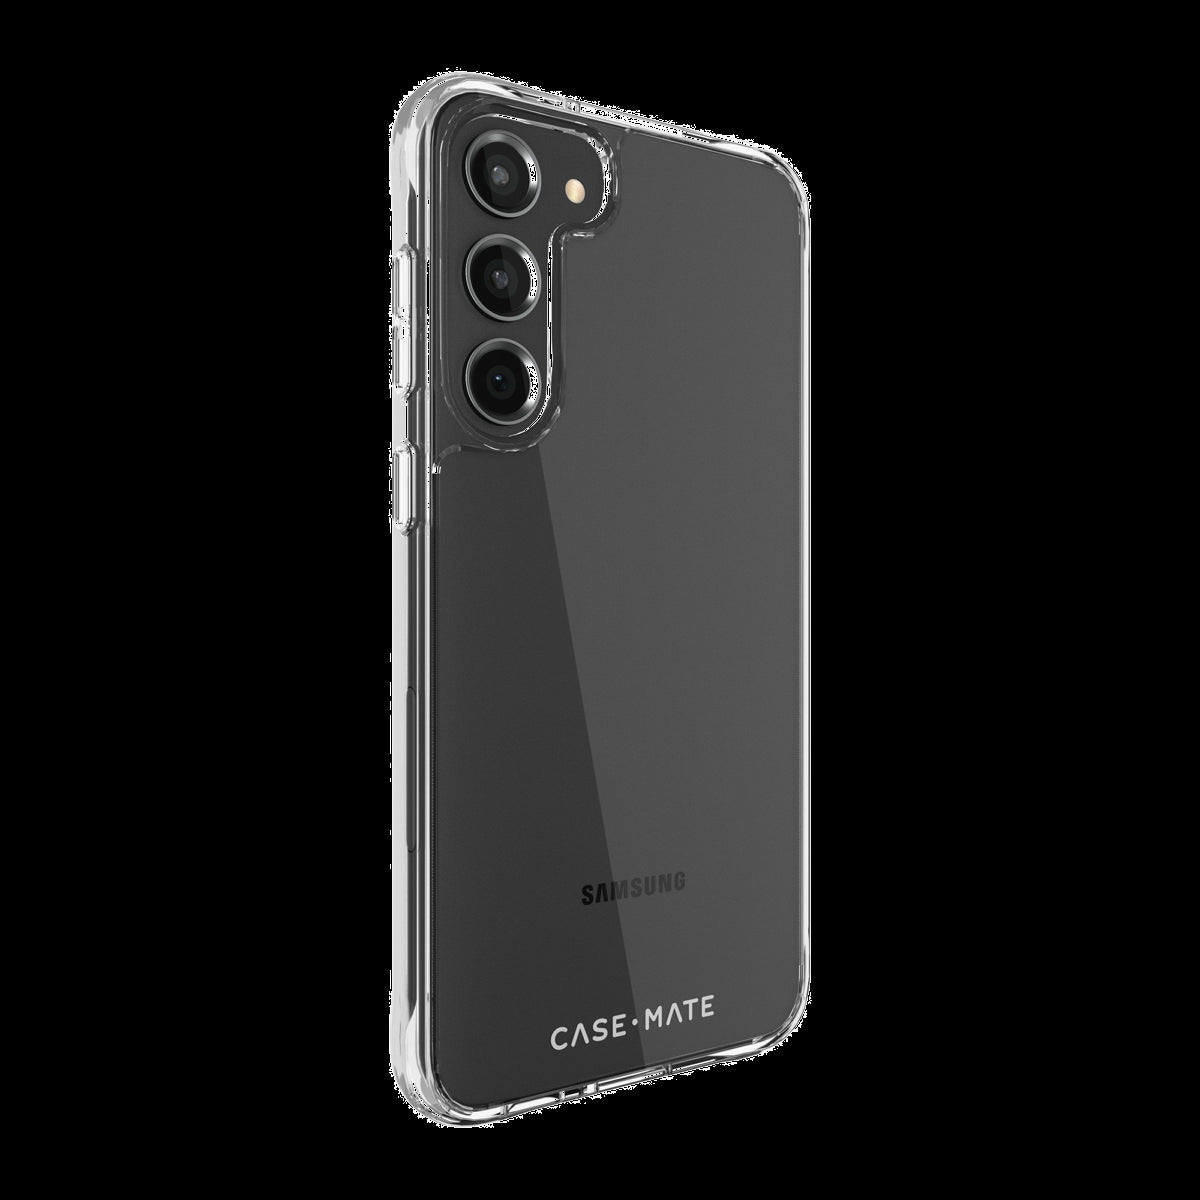 Clear, sleek and protective. The Case-Mate Tough Clear features 10-foot drop protection and a one-piece minimalistic design that will fit every occasion.